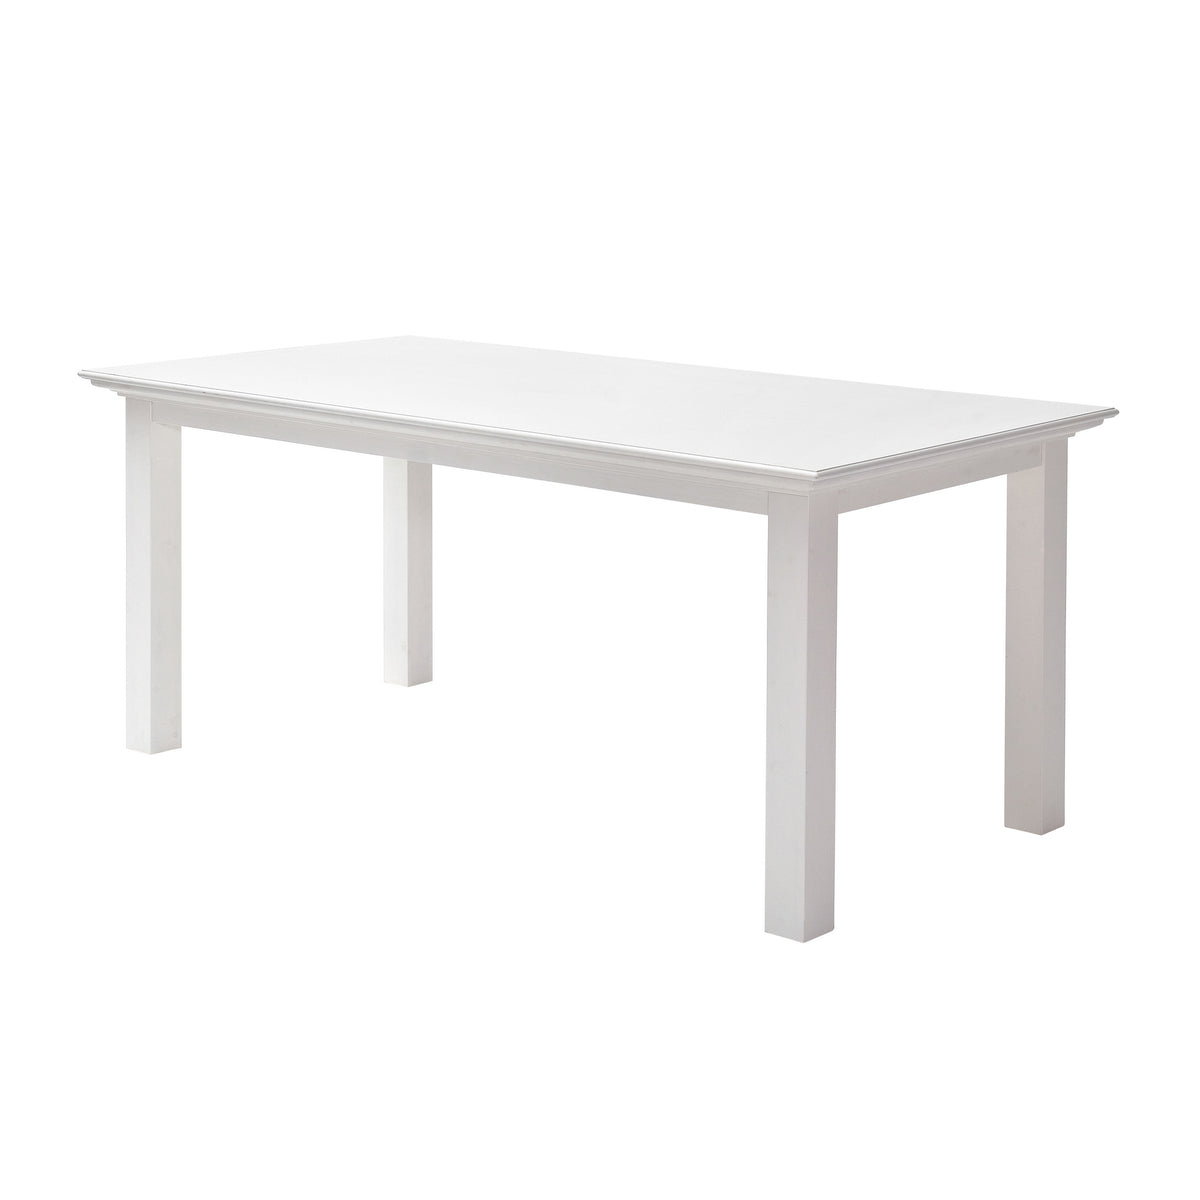 Halifax Timber Dining Table Classic White - Notbrand